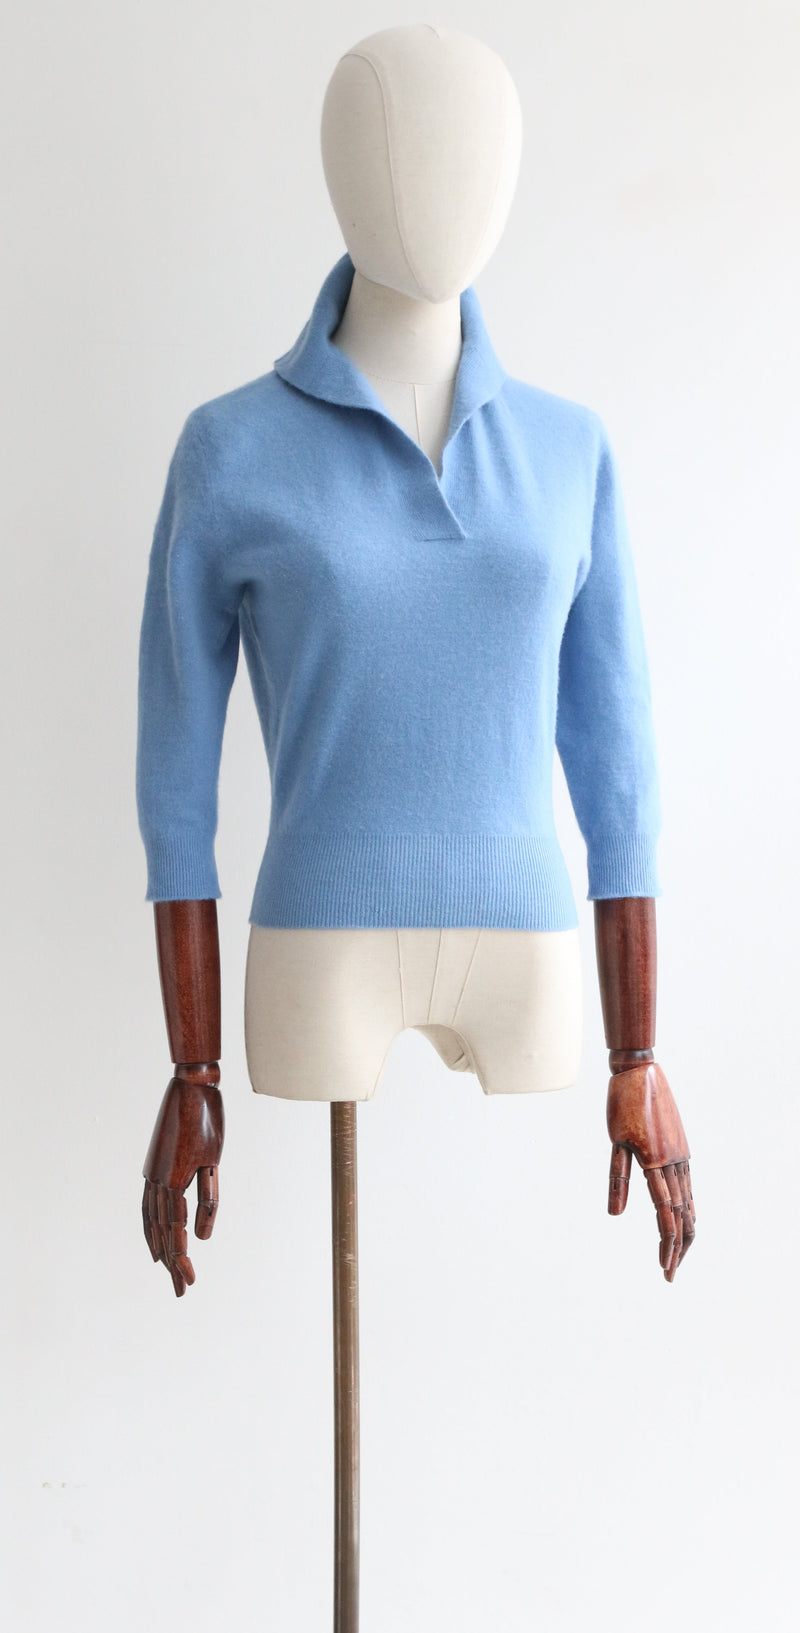 "French Blue" Vintage 1950's Lambs Wool Jumper UK 10 US 6